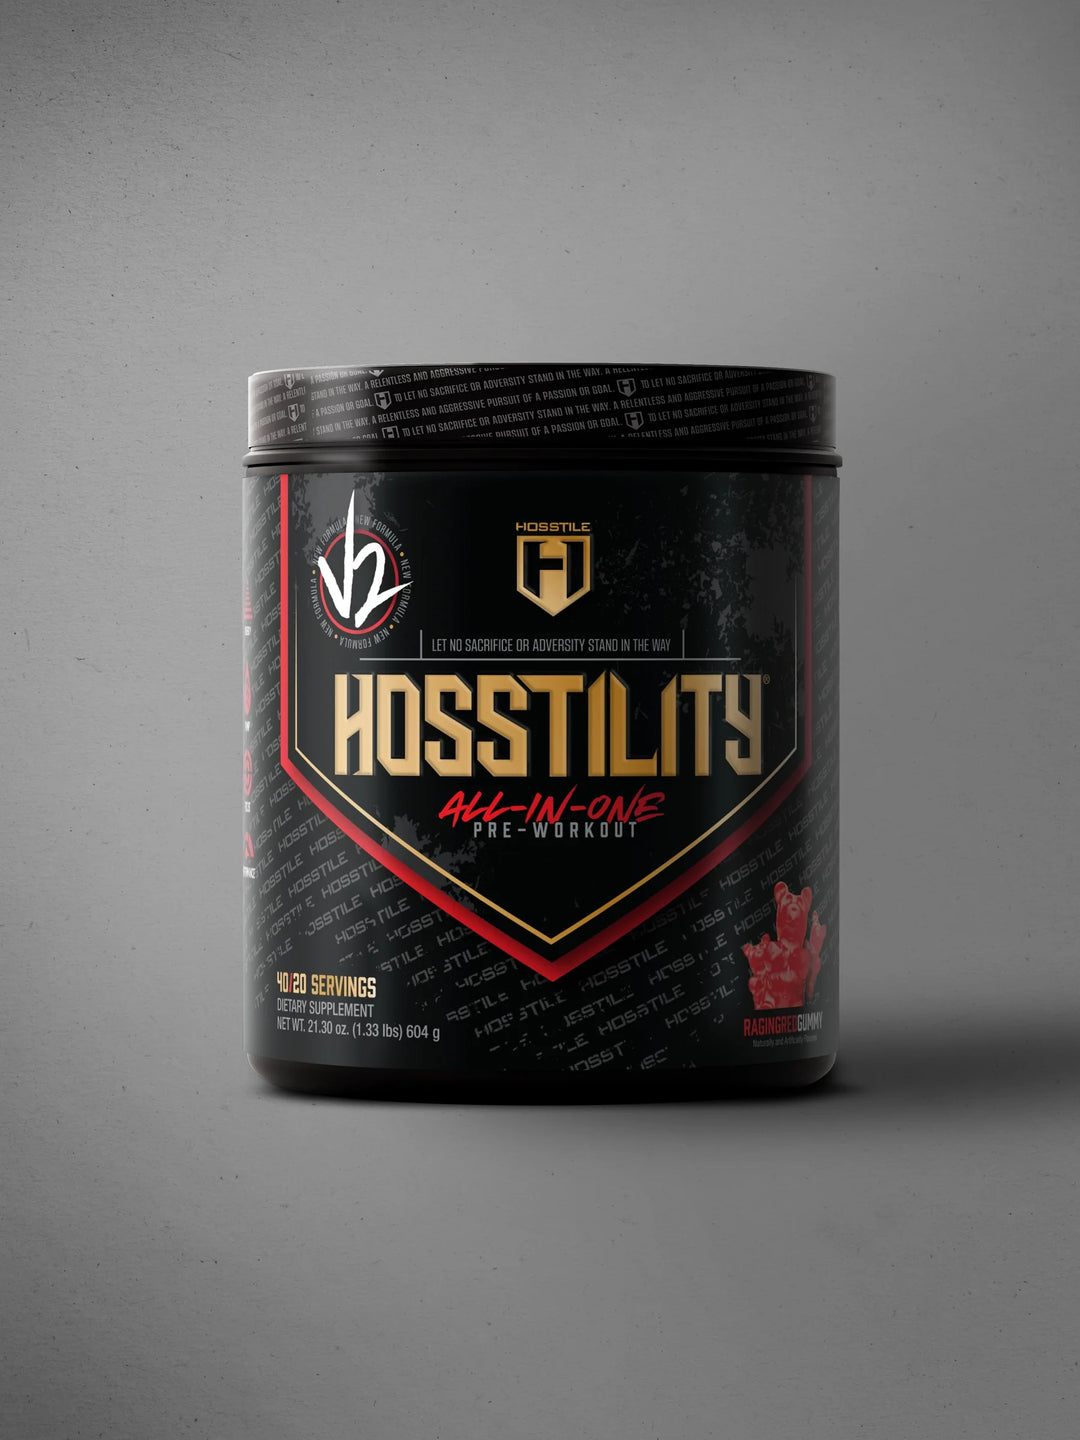 HOSSTILITY V2 ALL-IN-ONE PRE-WORKOUT